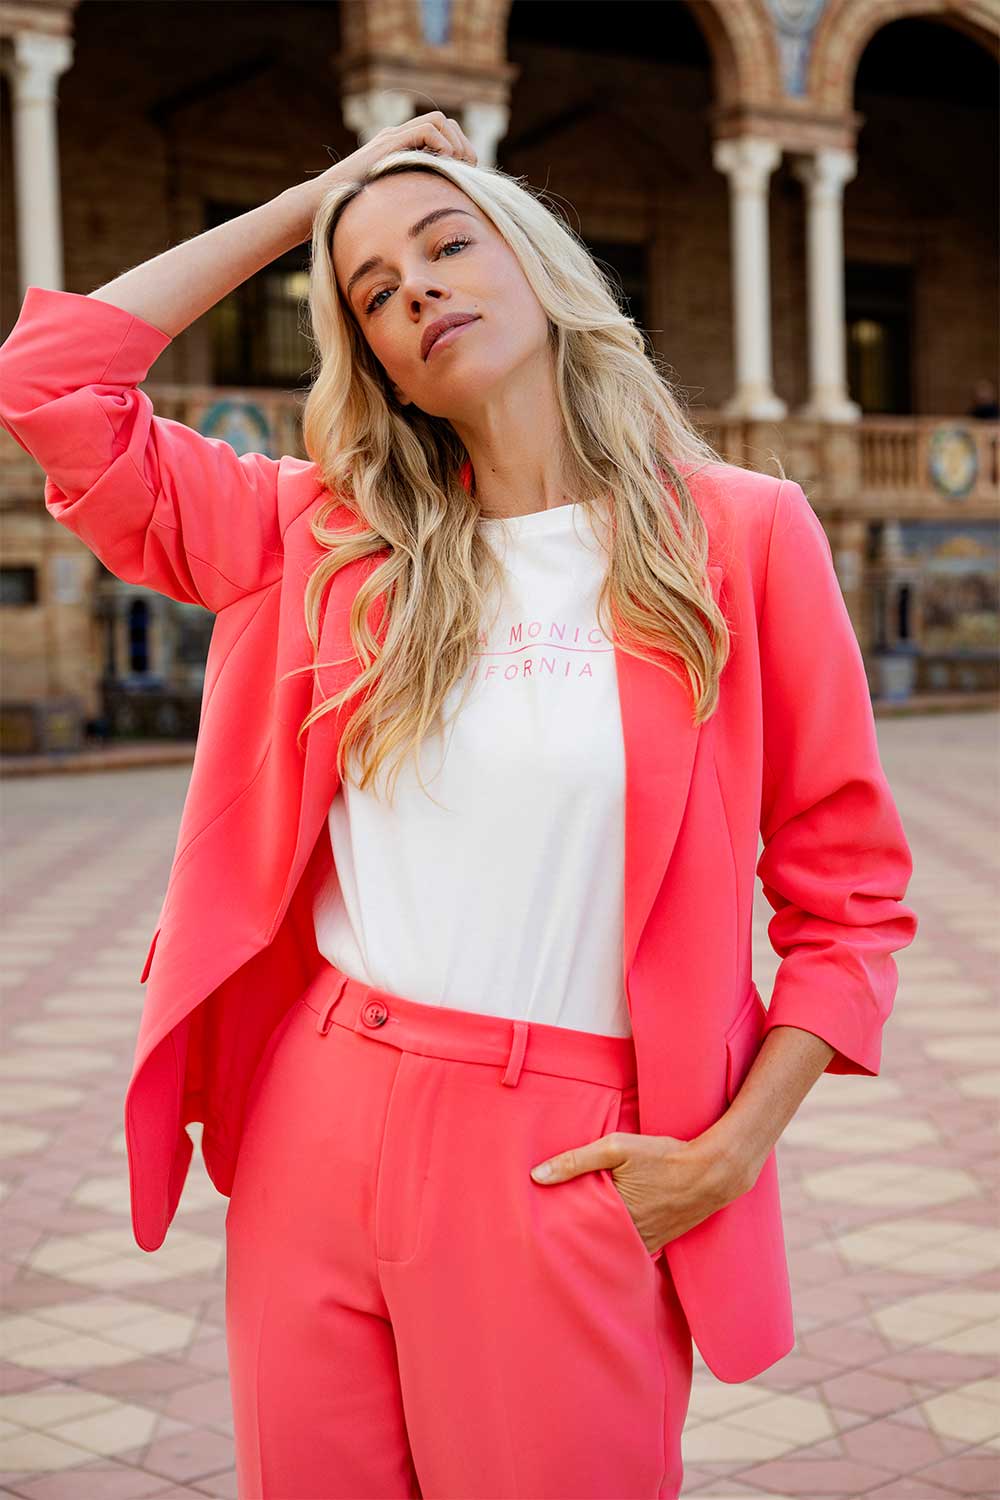 Esqulao (SP2410023) Women's Ruched 3/4 Sleeve Open Front Blazer with Flap Pockets in Strawberry PInk